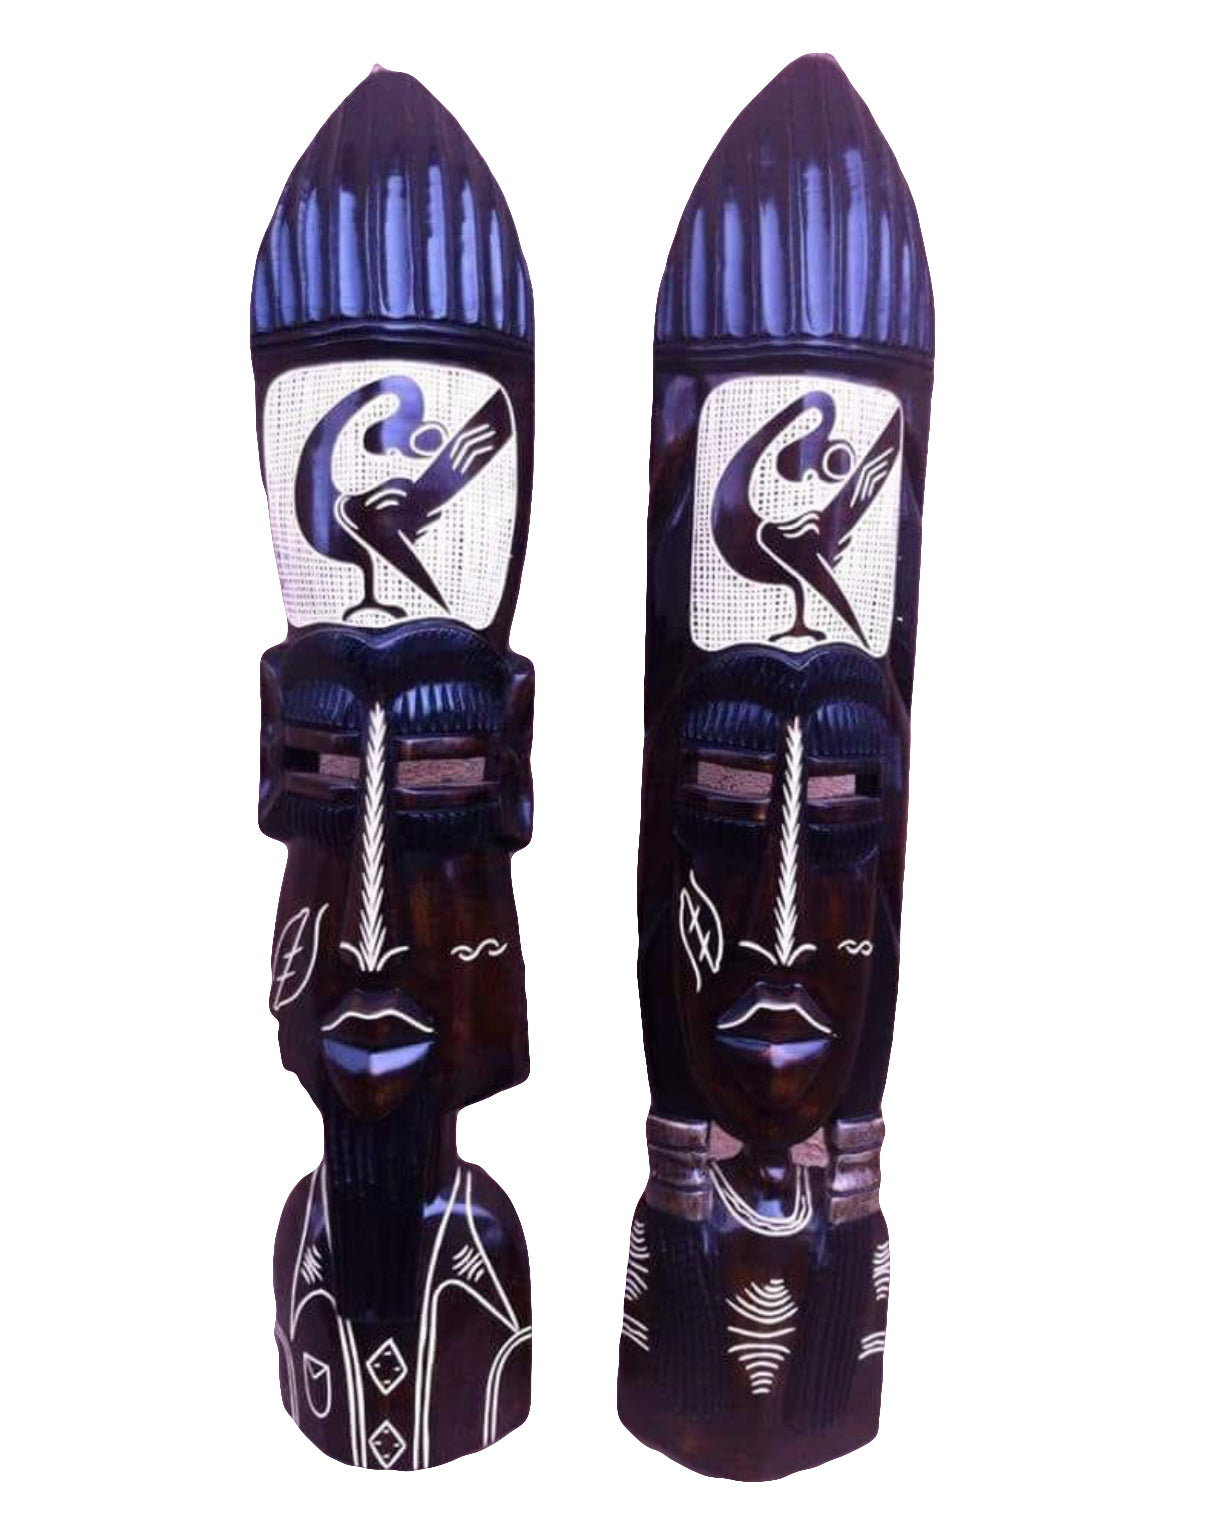 African Vintage Hand Carved Wooden Royal African Tribal Art Puple Black & White Printed Wall Hanging Mask